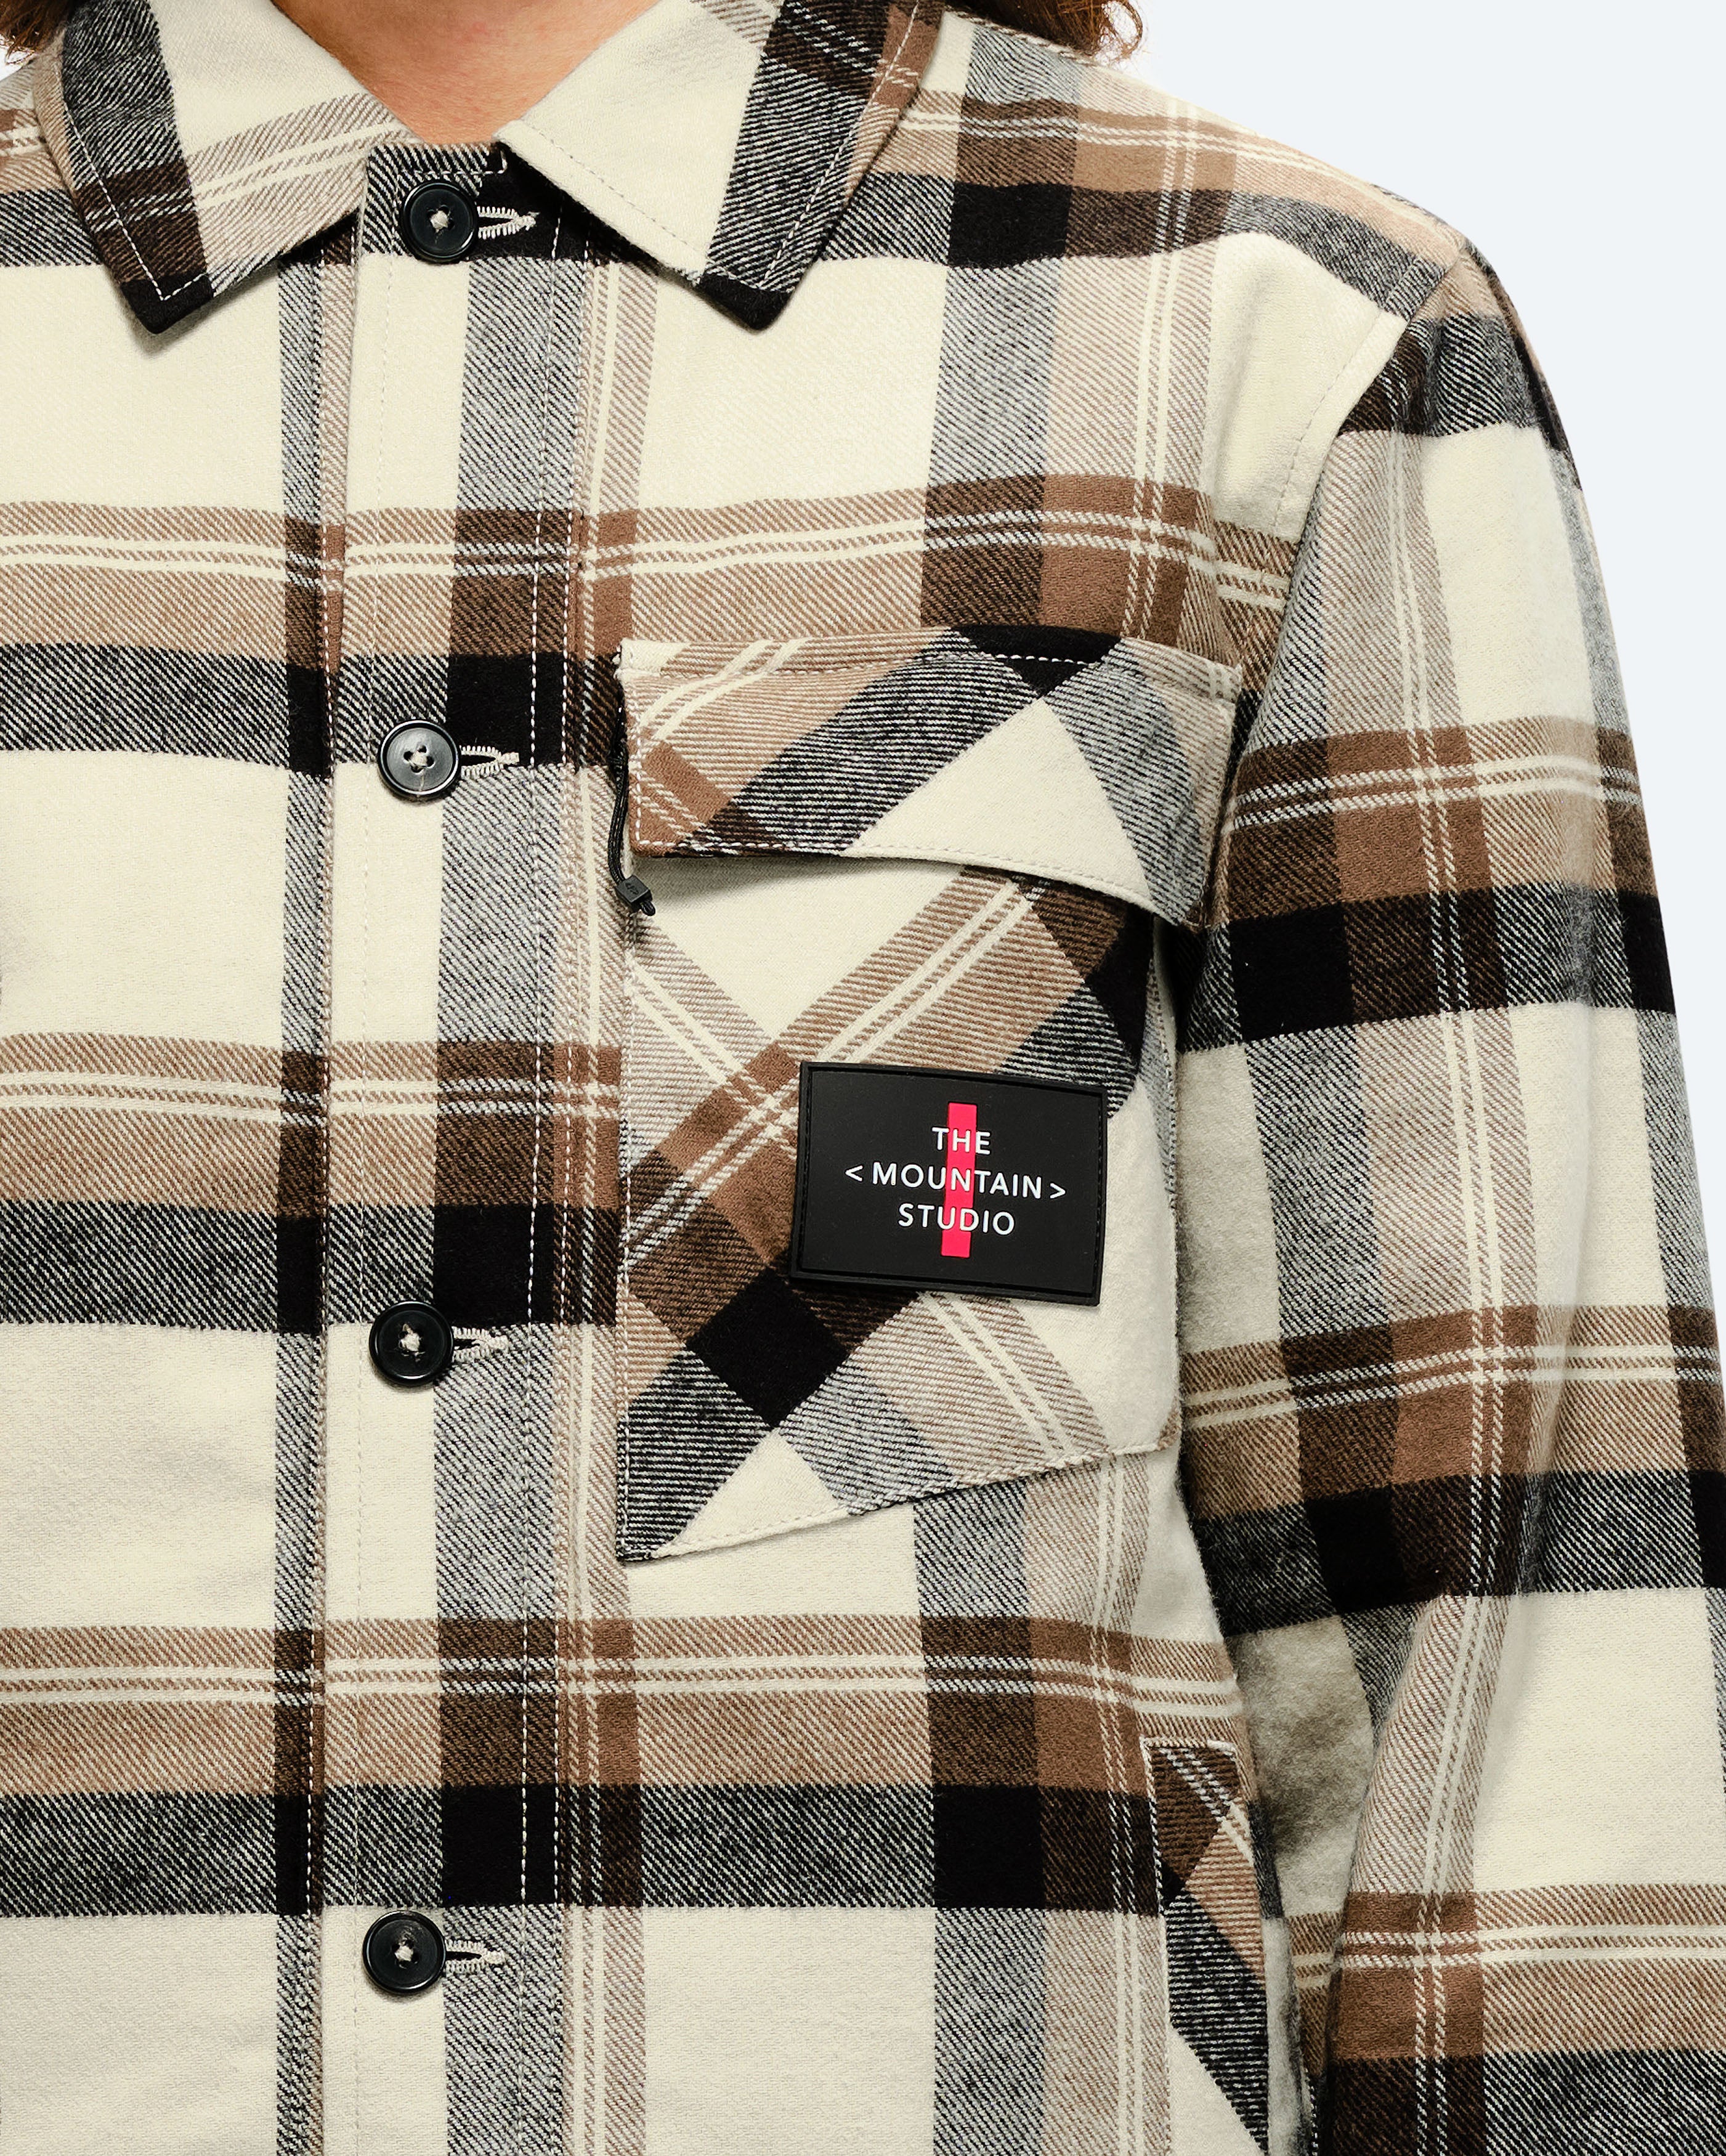 Signature chest pocket with zip.
Cotton flannel. card image